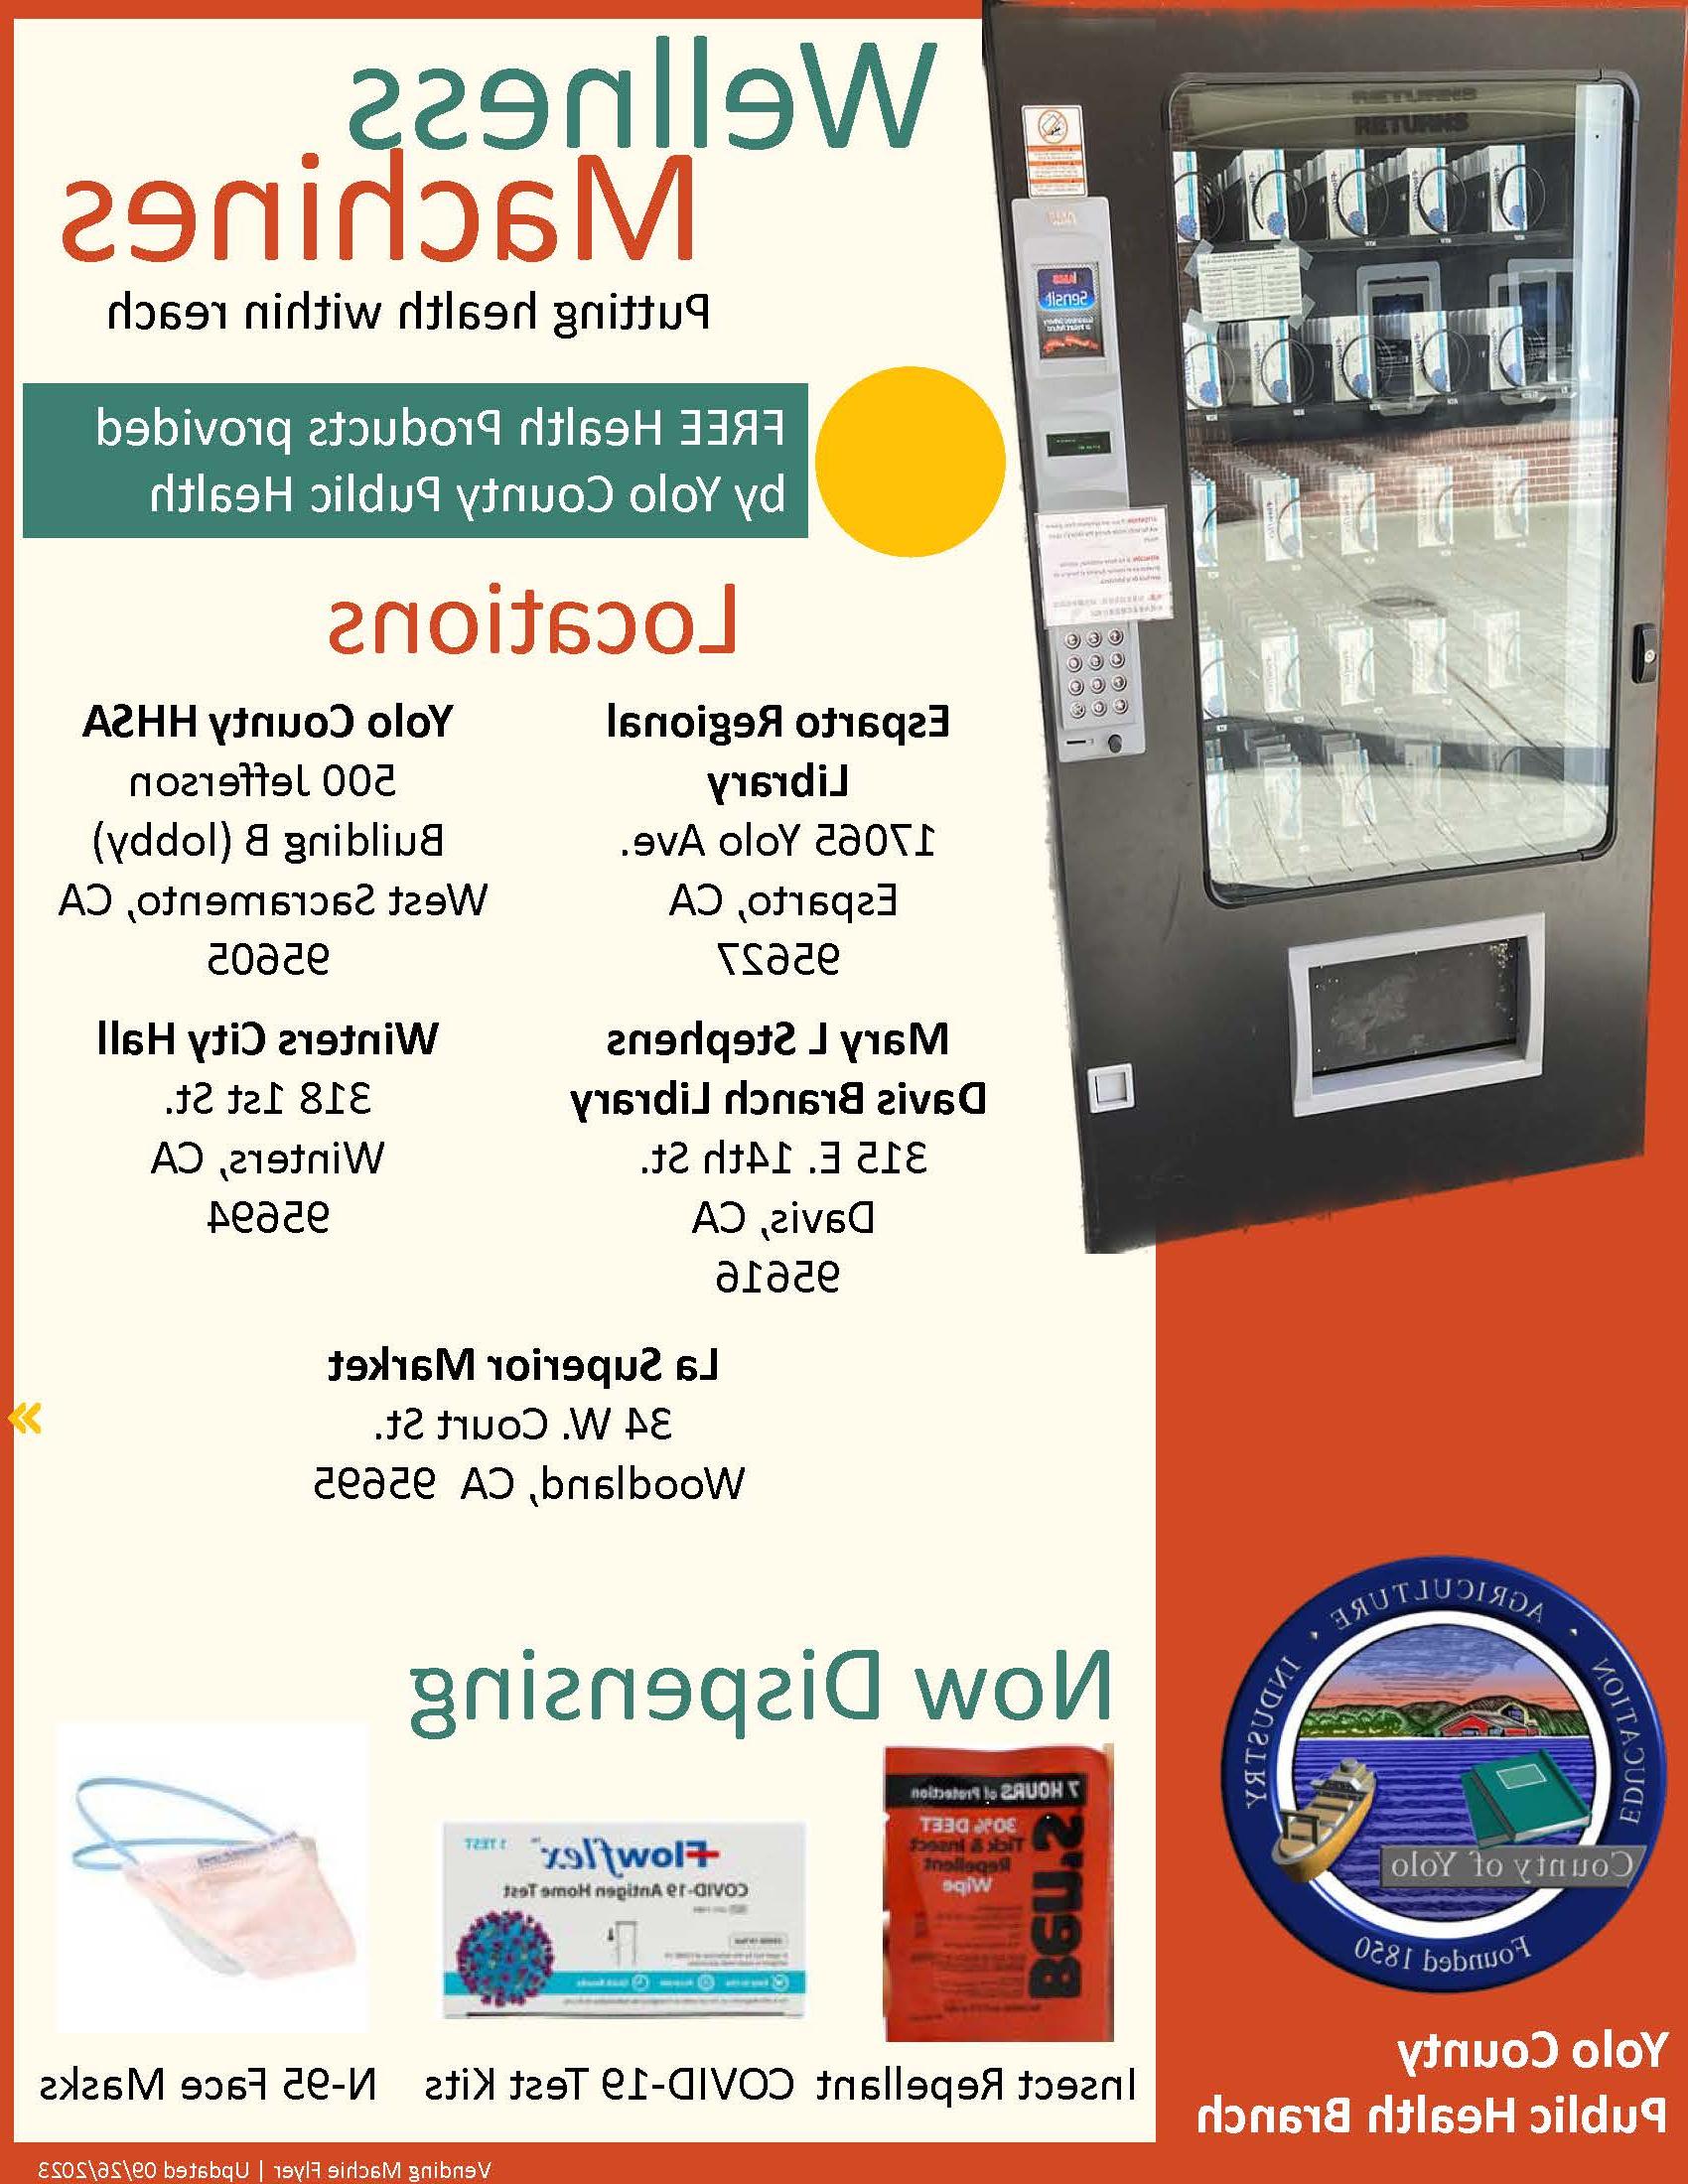 Vending machine with COVID-19 tests